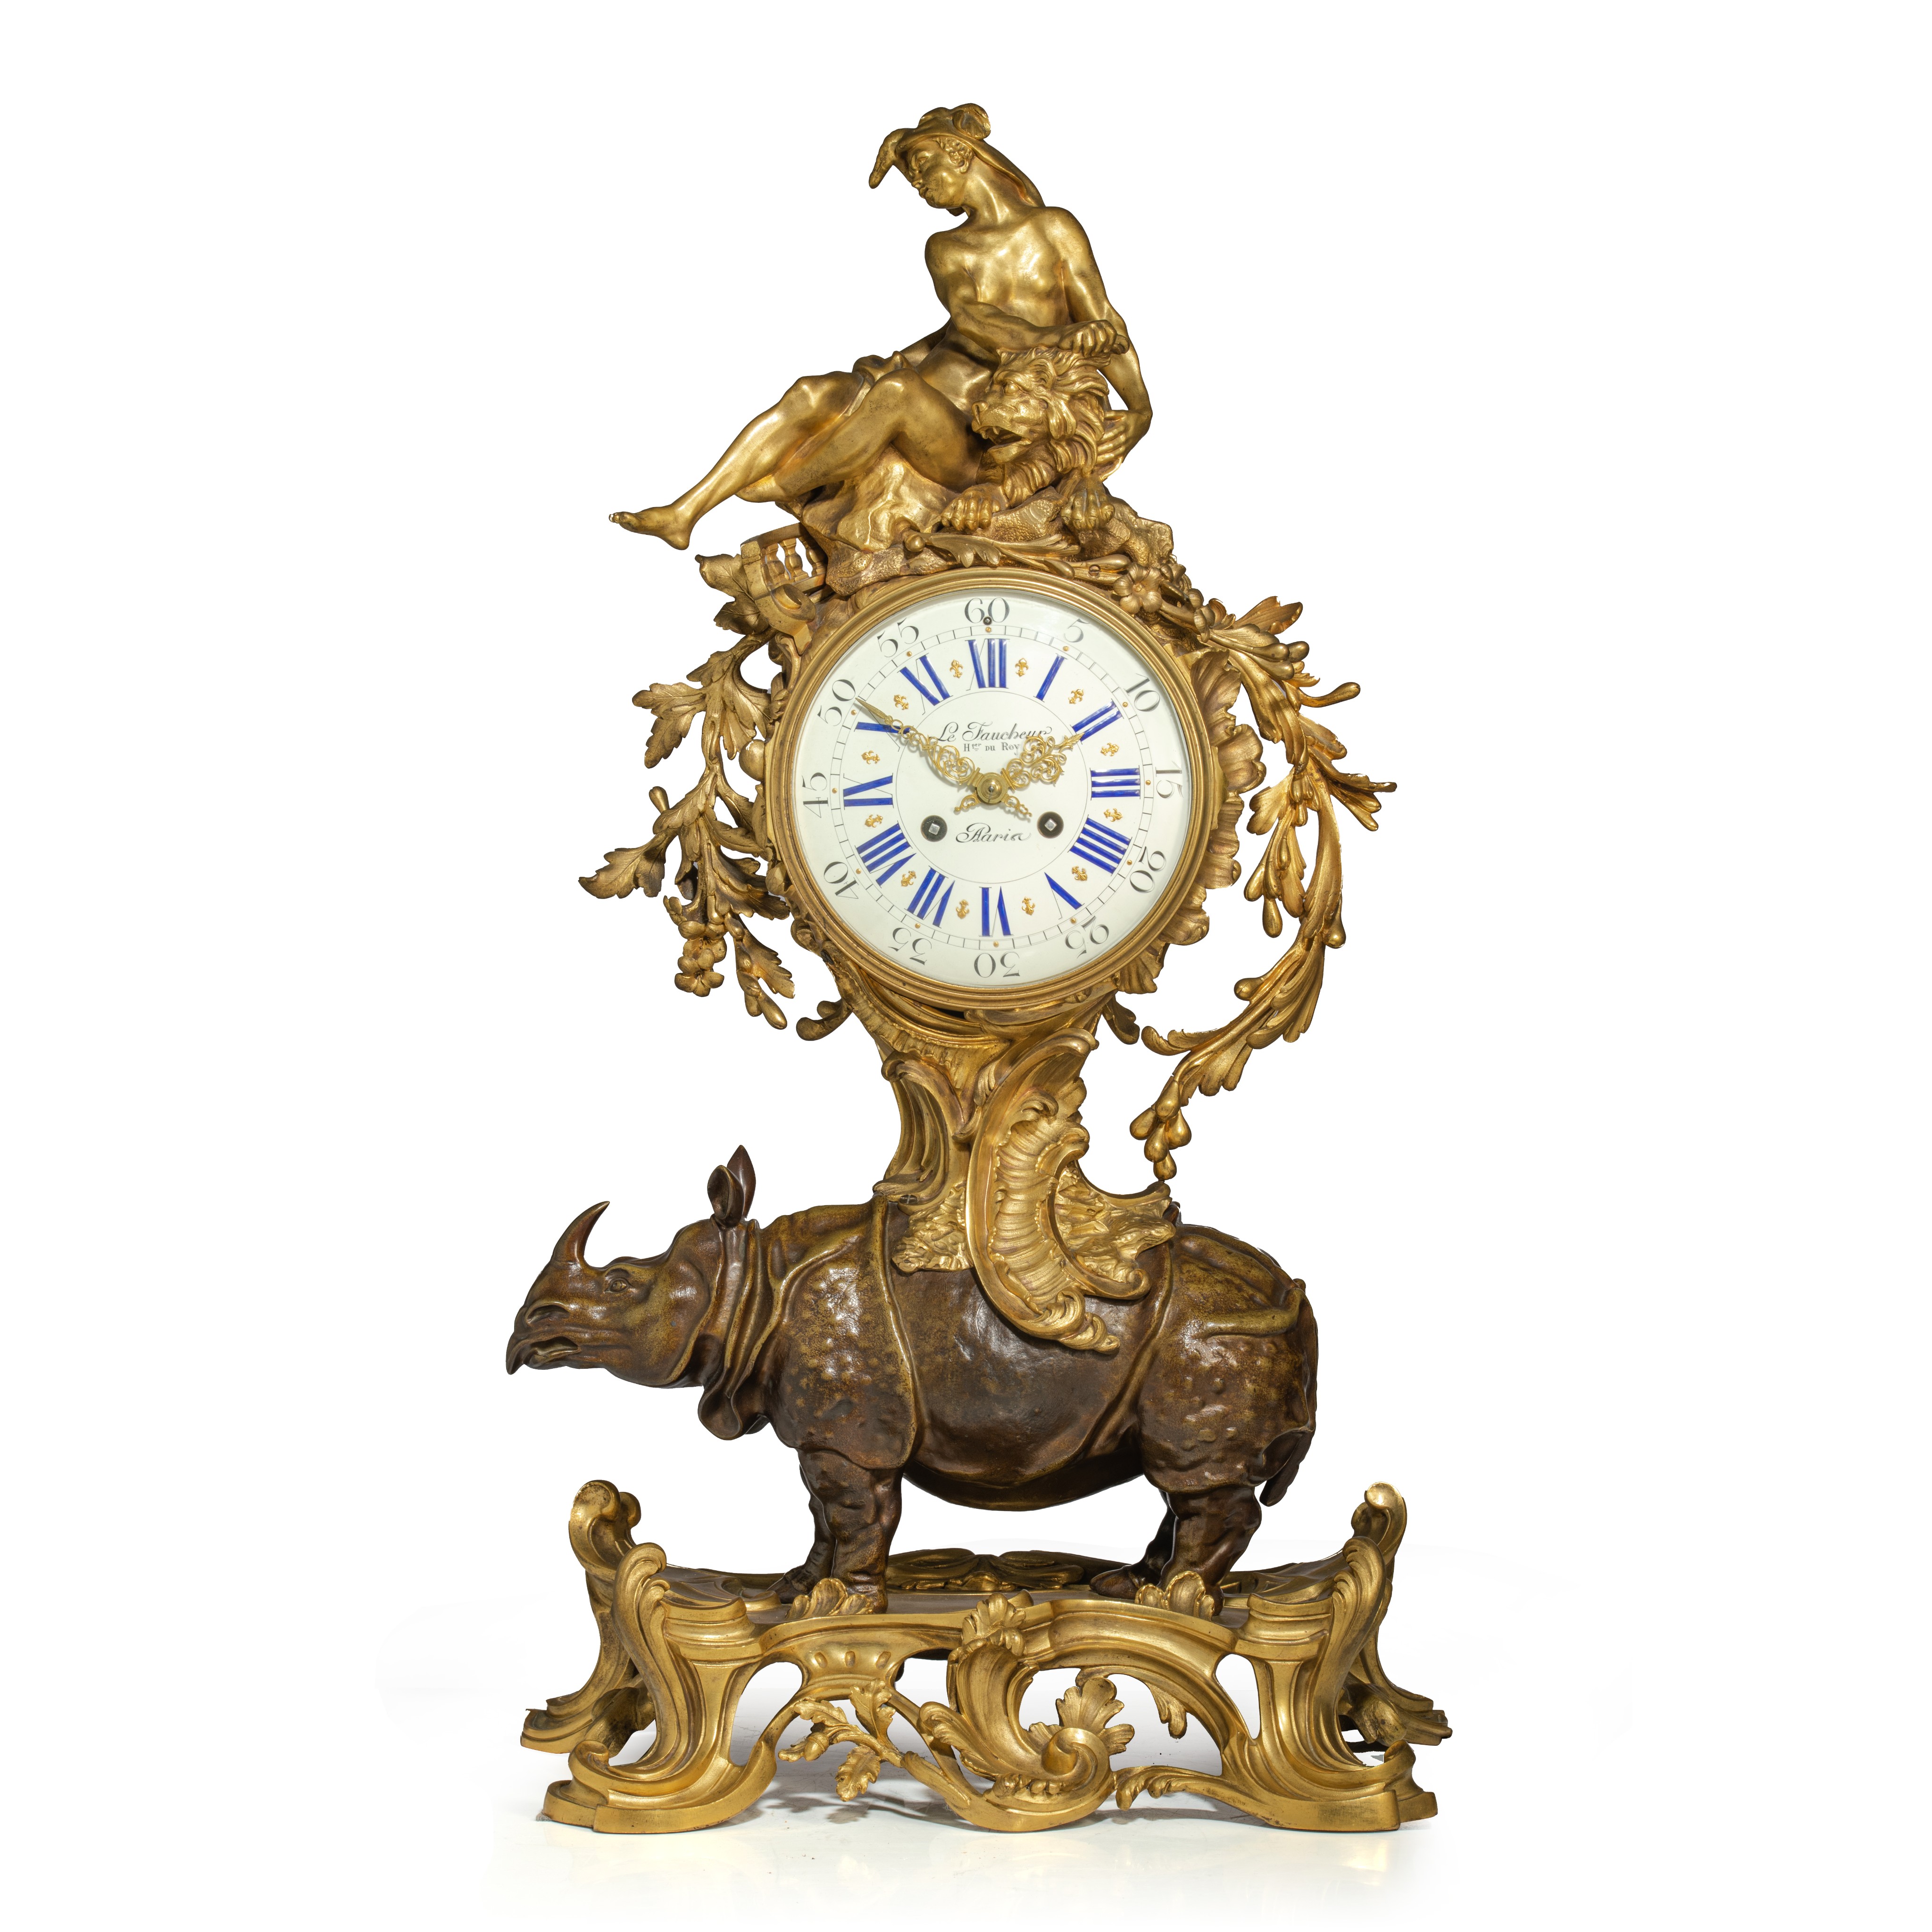 A very imposing Rococo style rhinoceros mantel clock, the dial signed 'Le Faucheur, Paris', H 77 - W